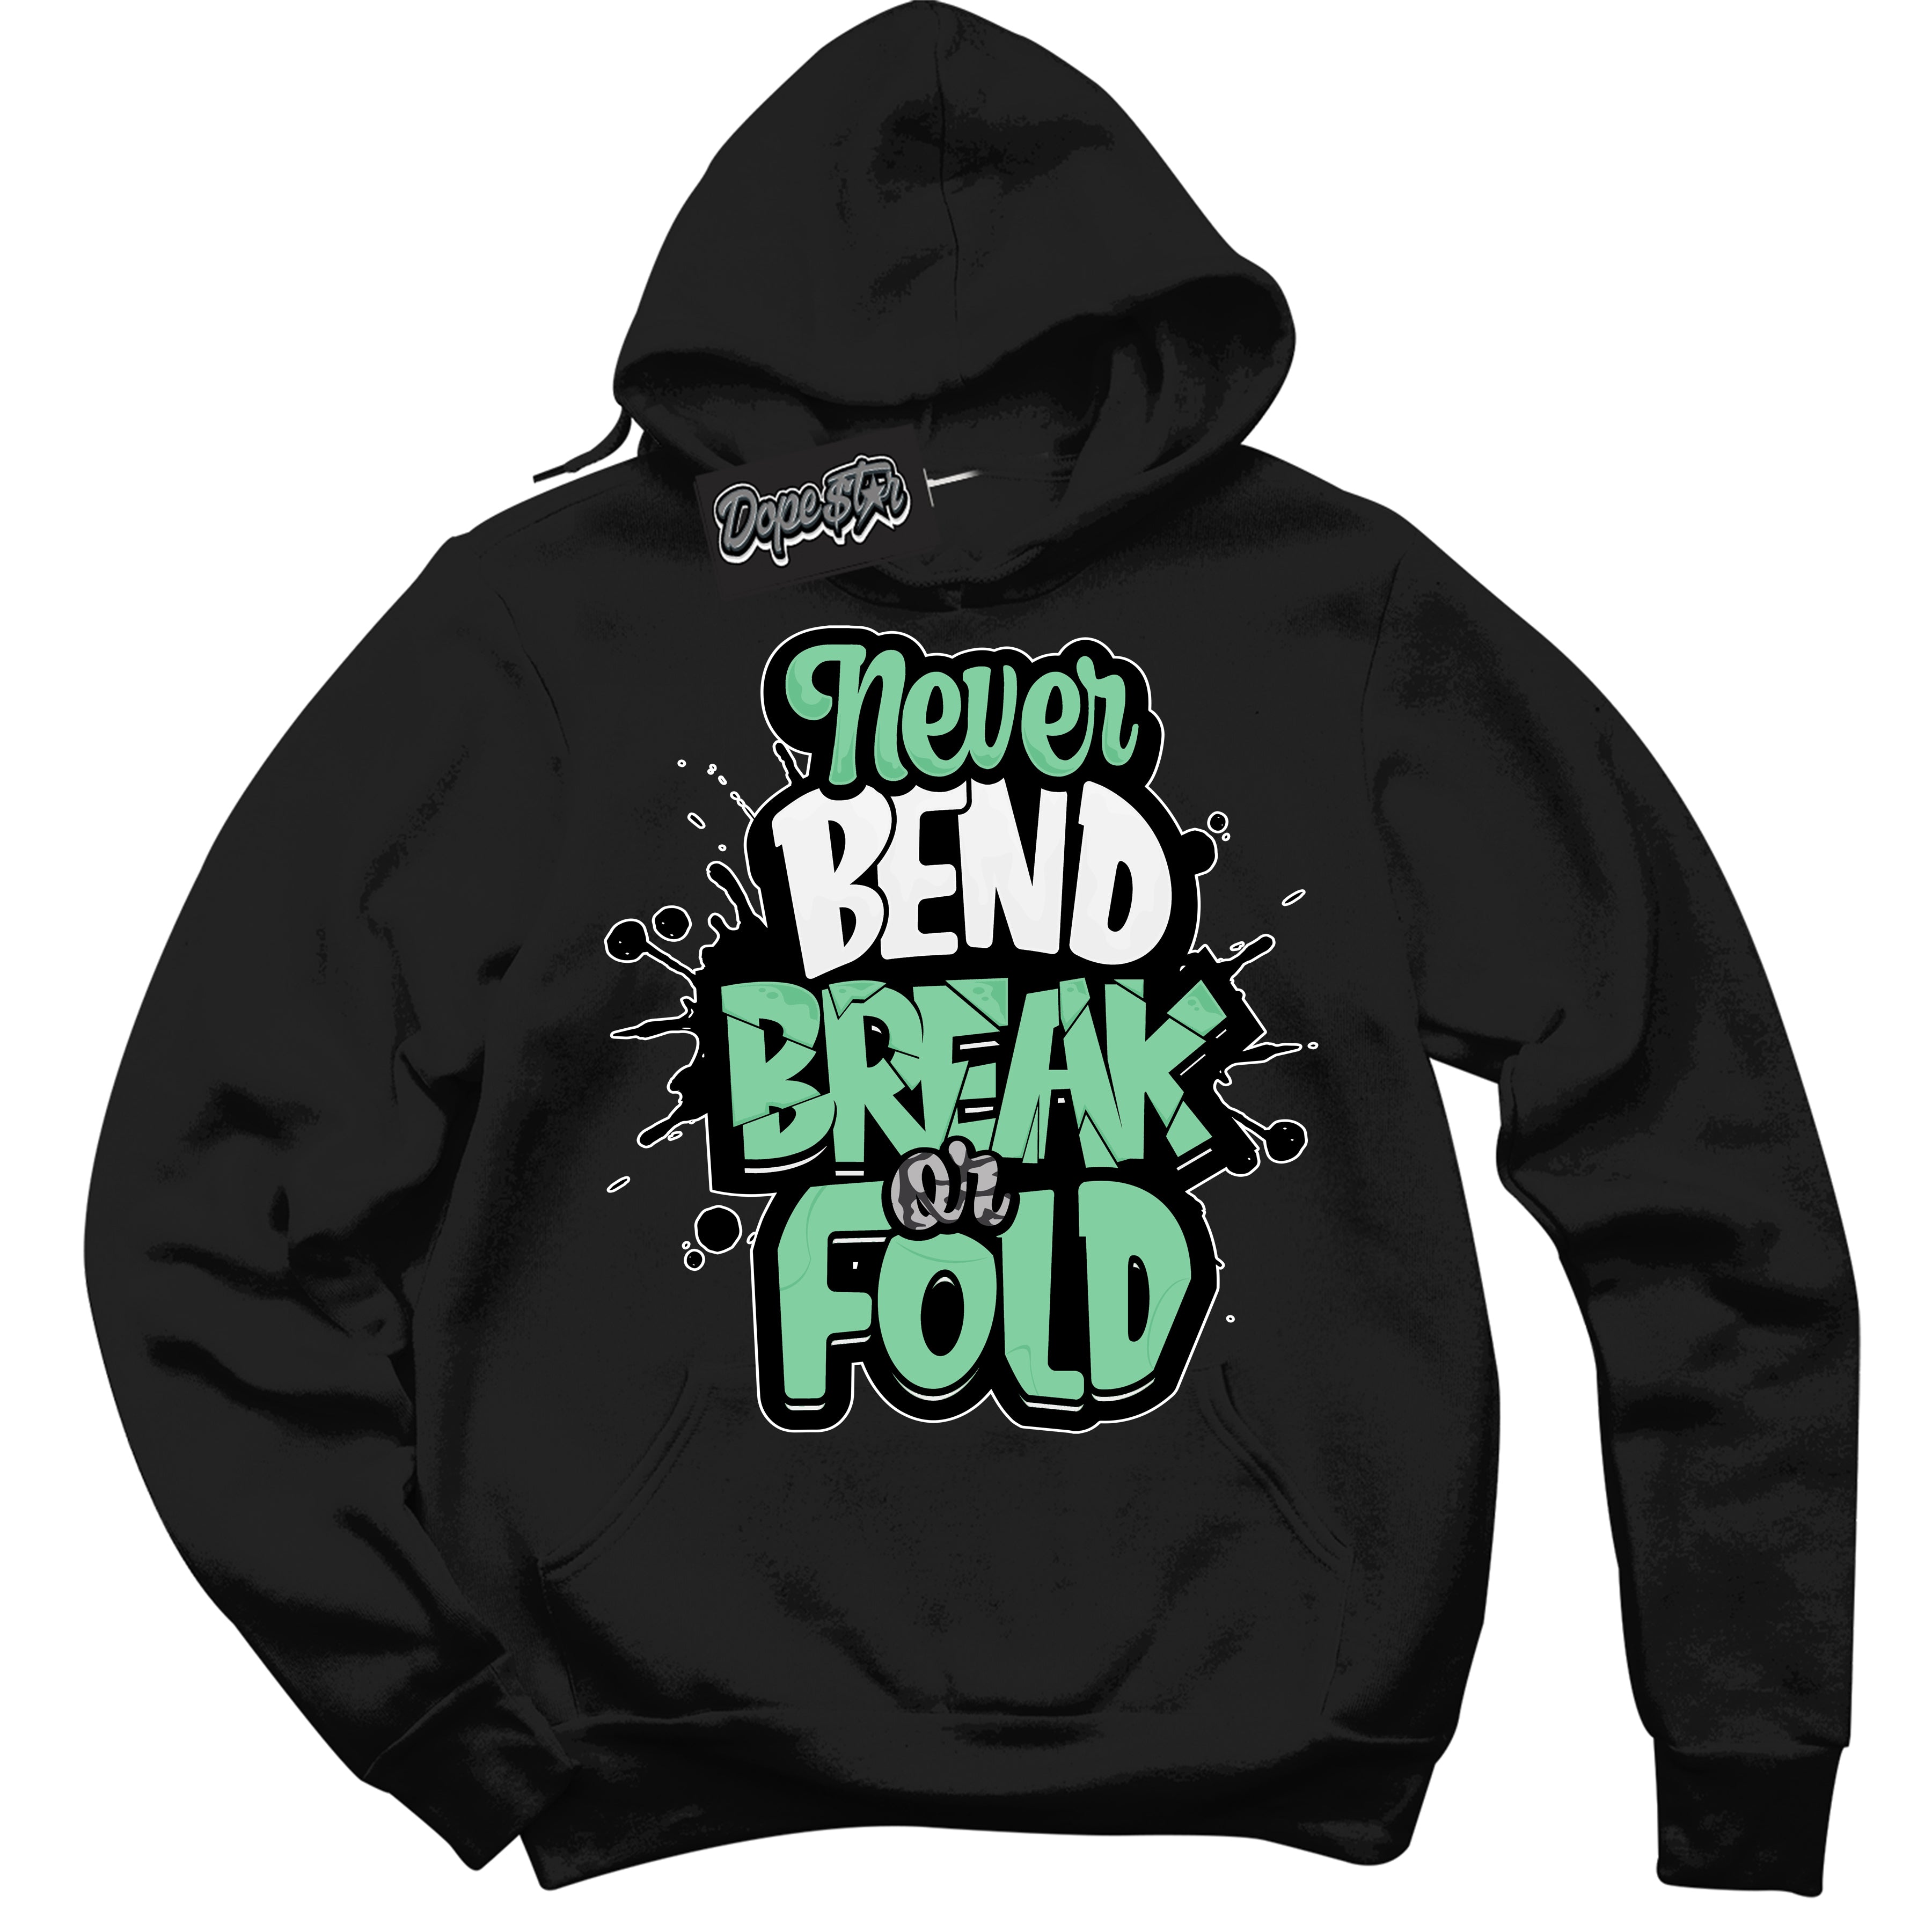 Cool Black Graphic DopeStar Hoodie with “ Never Bend Break or Fold “ print, that perfectly matches Green Glow 3S sneakers